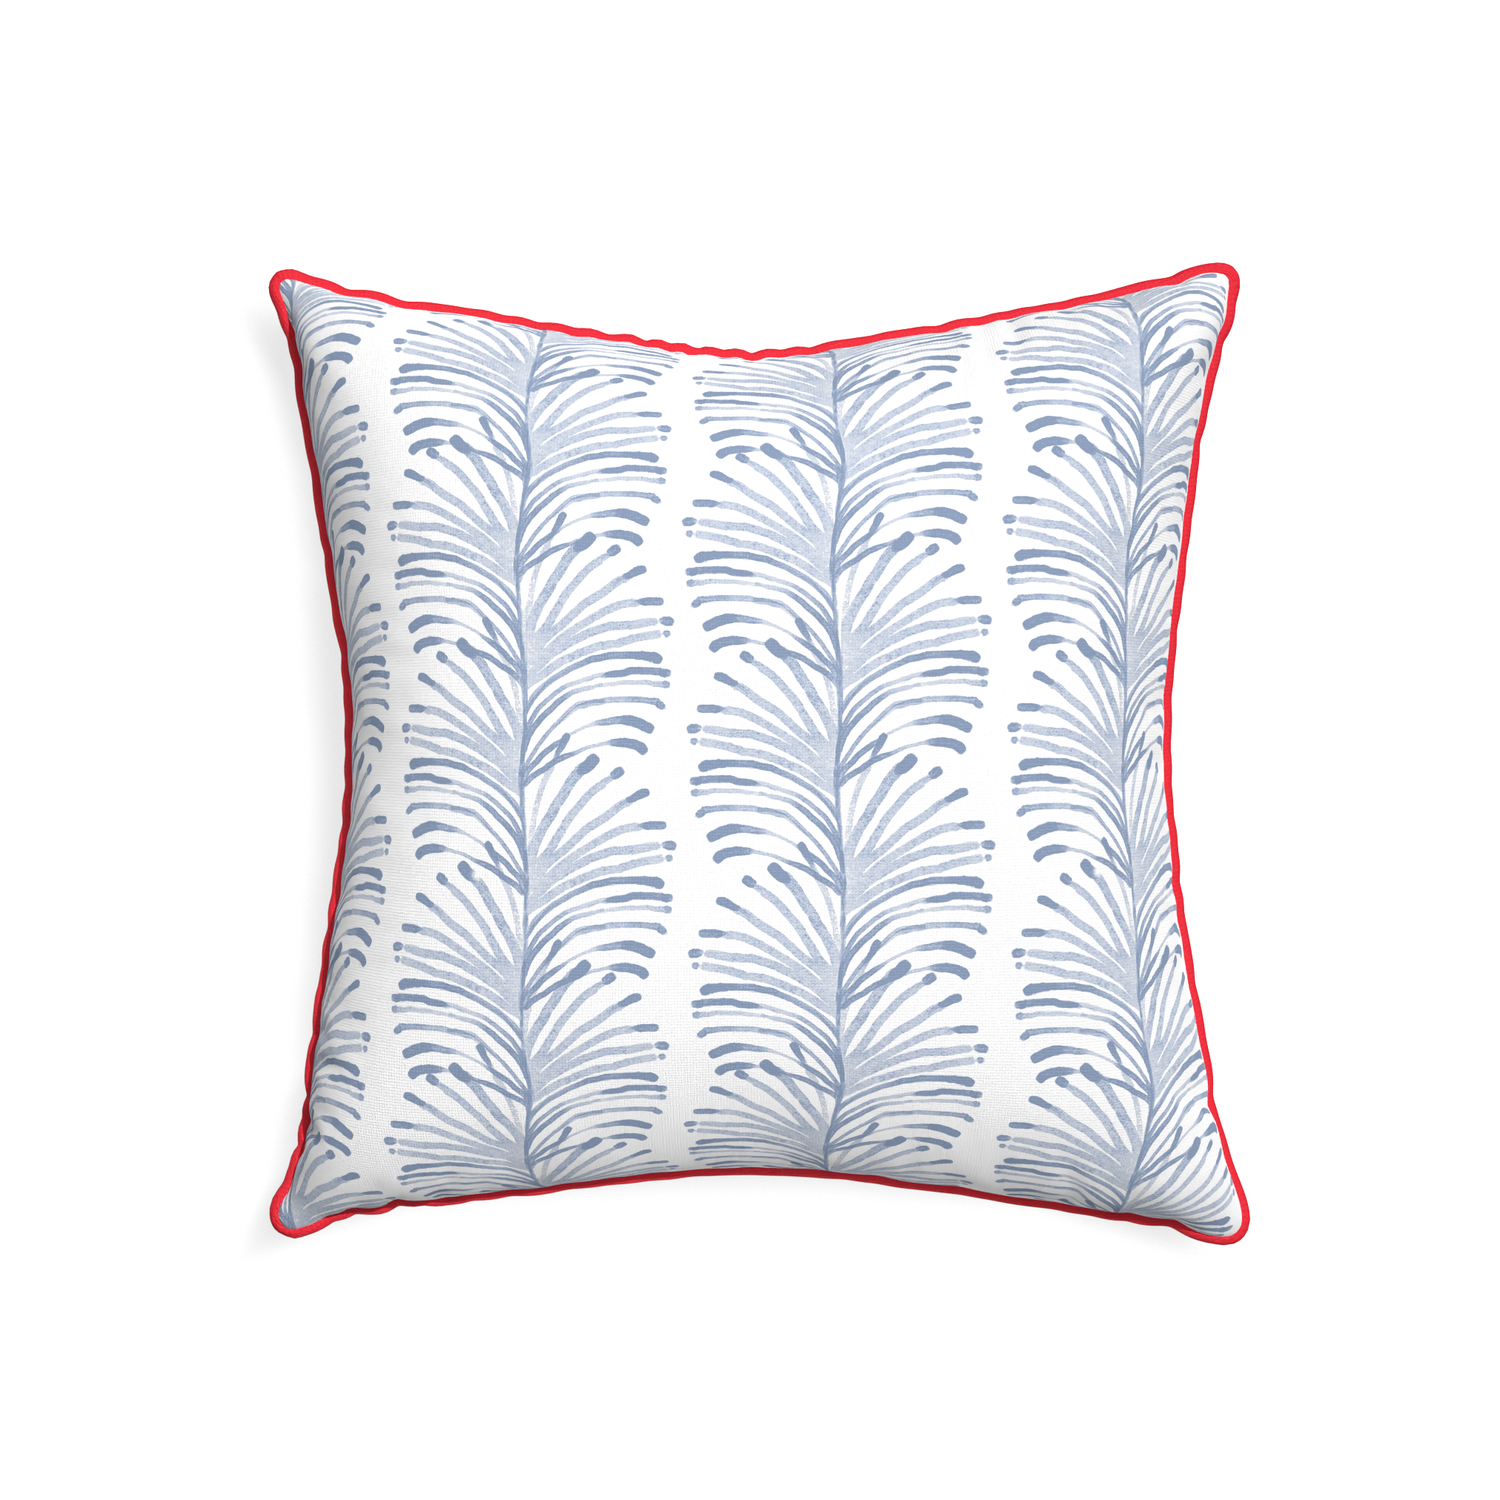 22-square emma sky custom sky blue botanical stripepillow with cherry piping on white background